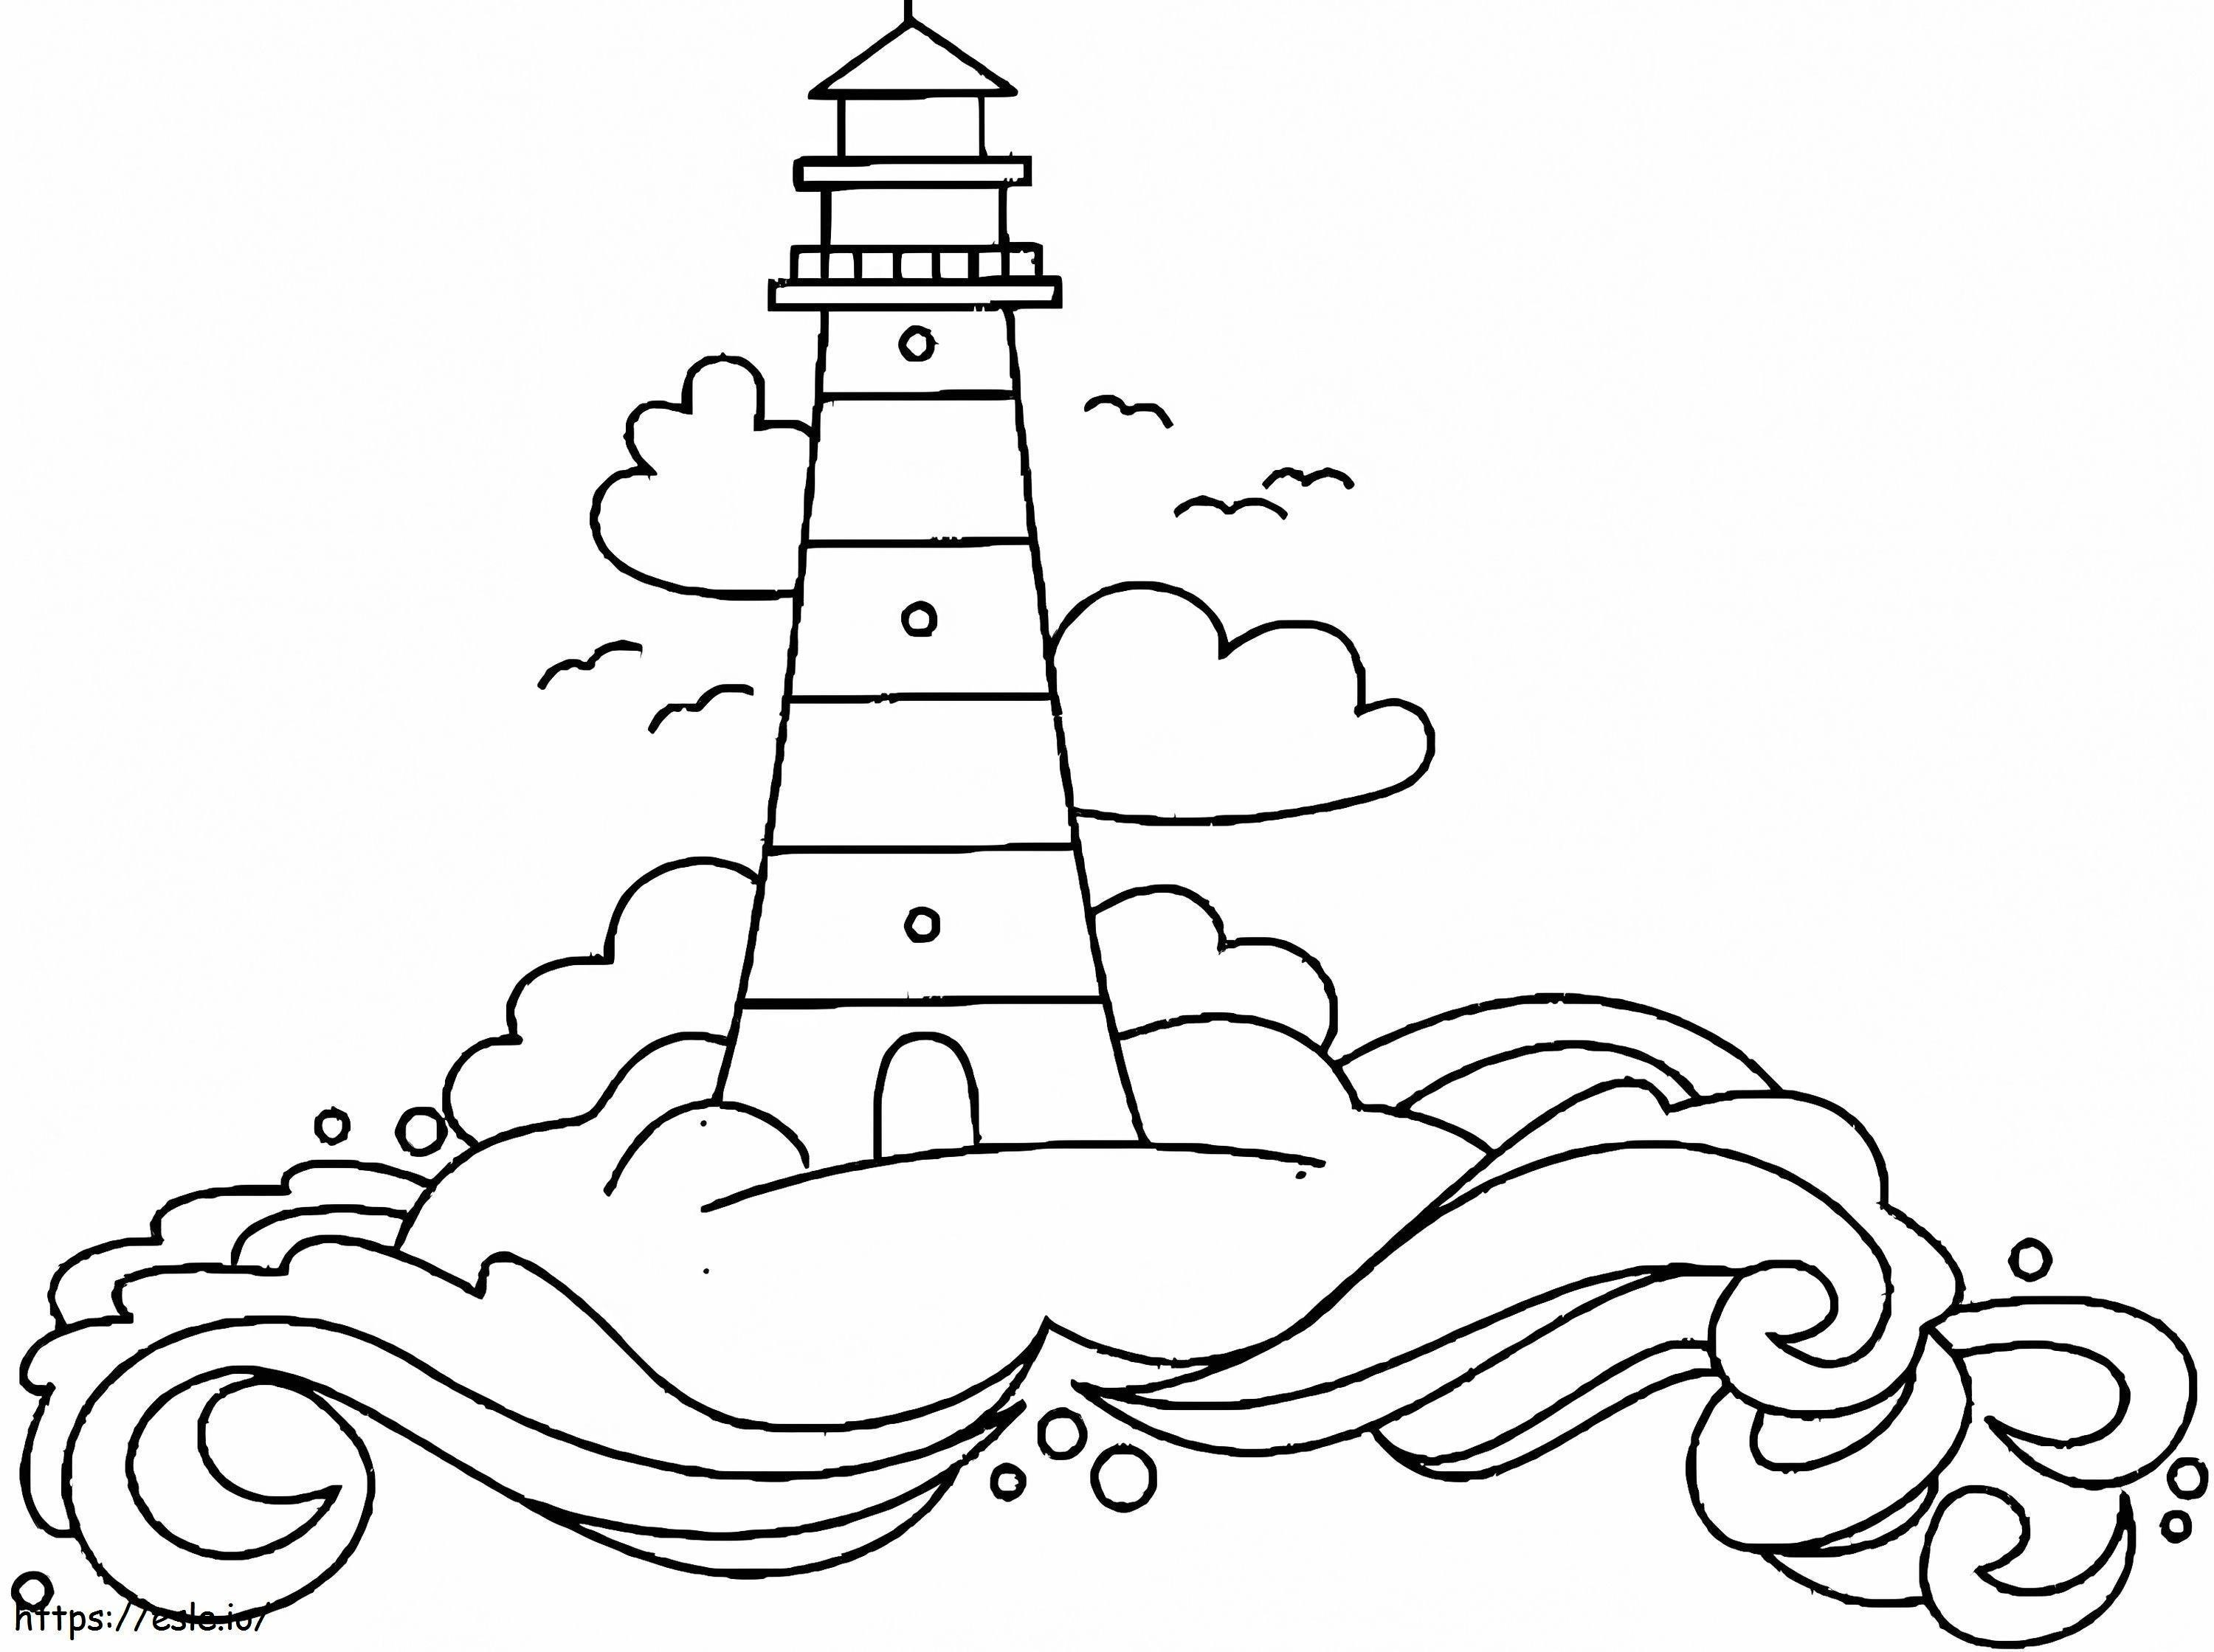 Lighthouse 7 coloring page